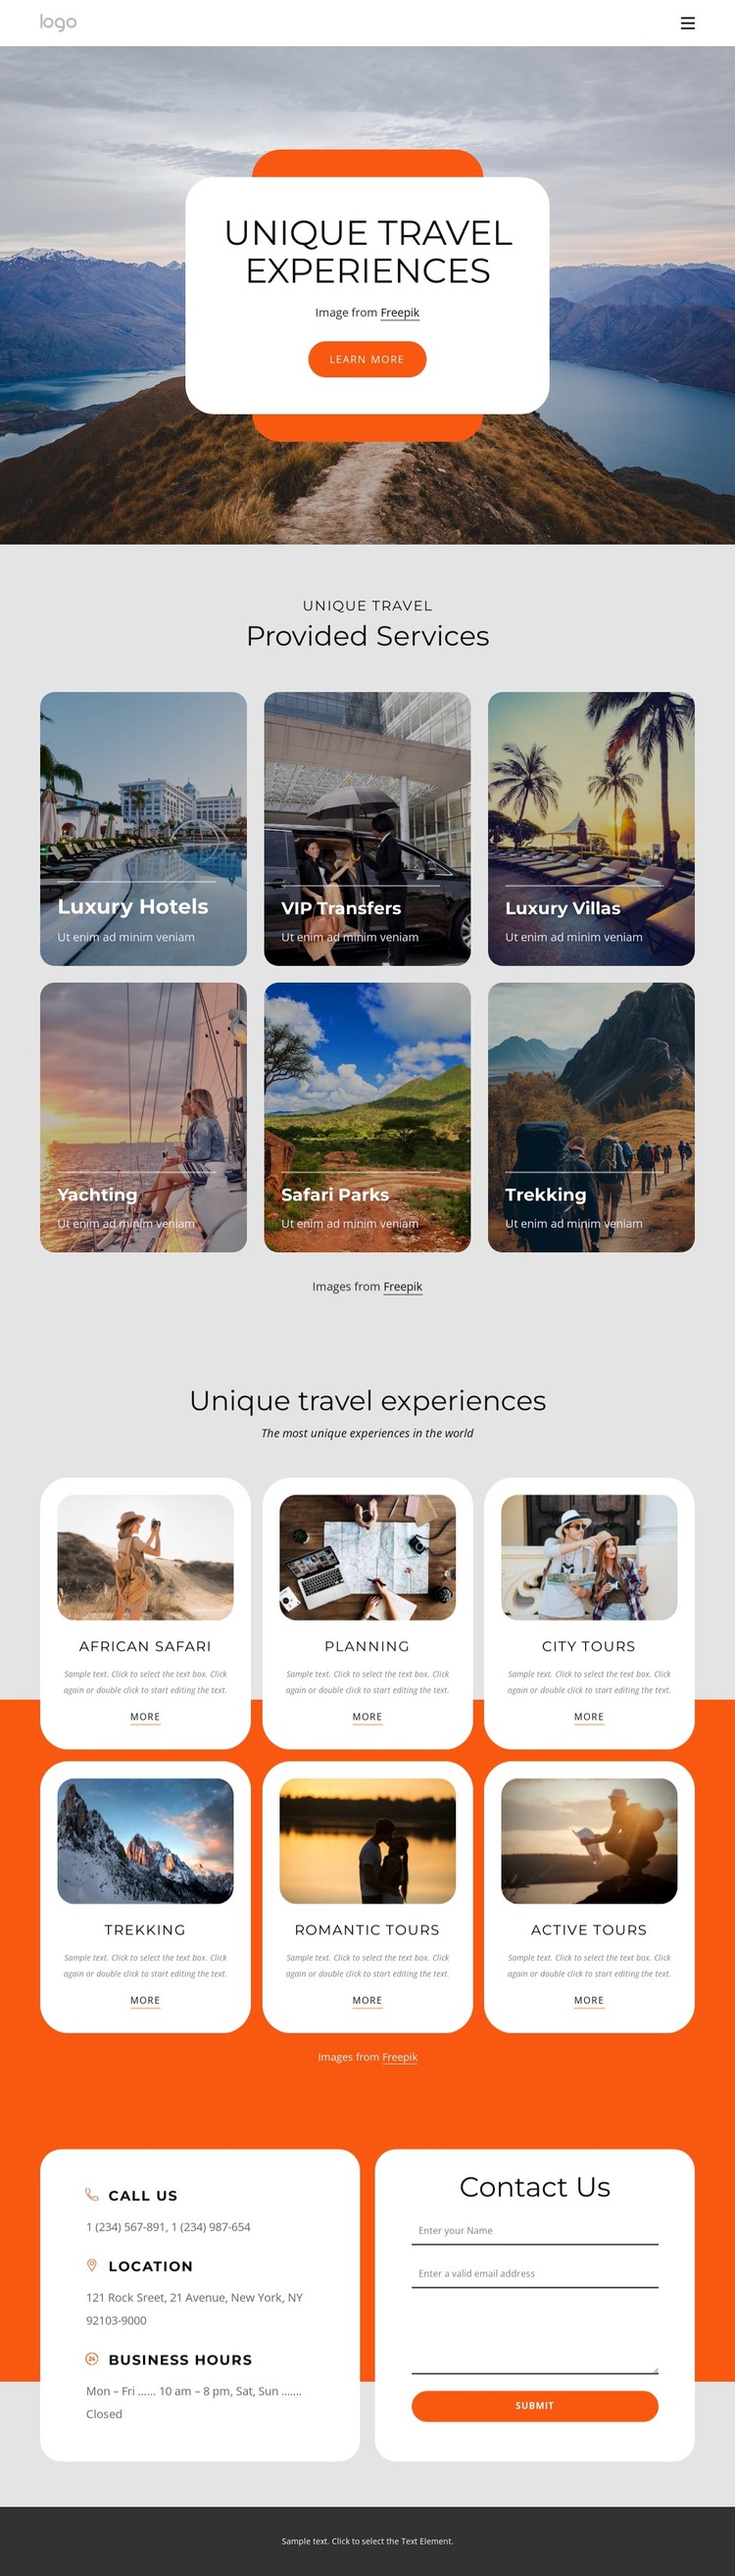 Luxury small-group travel experience Web Design